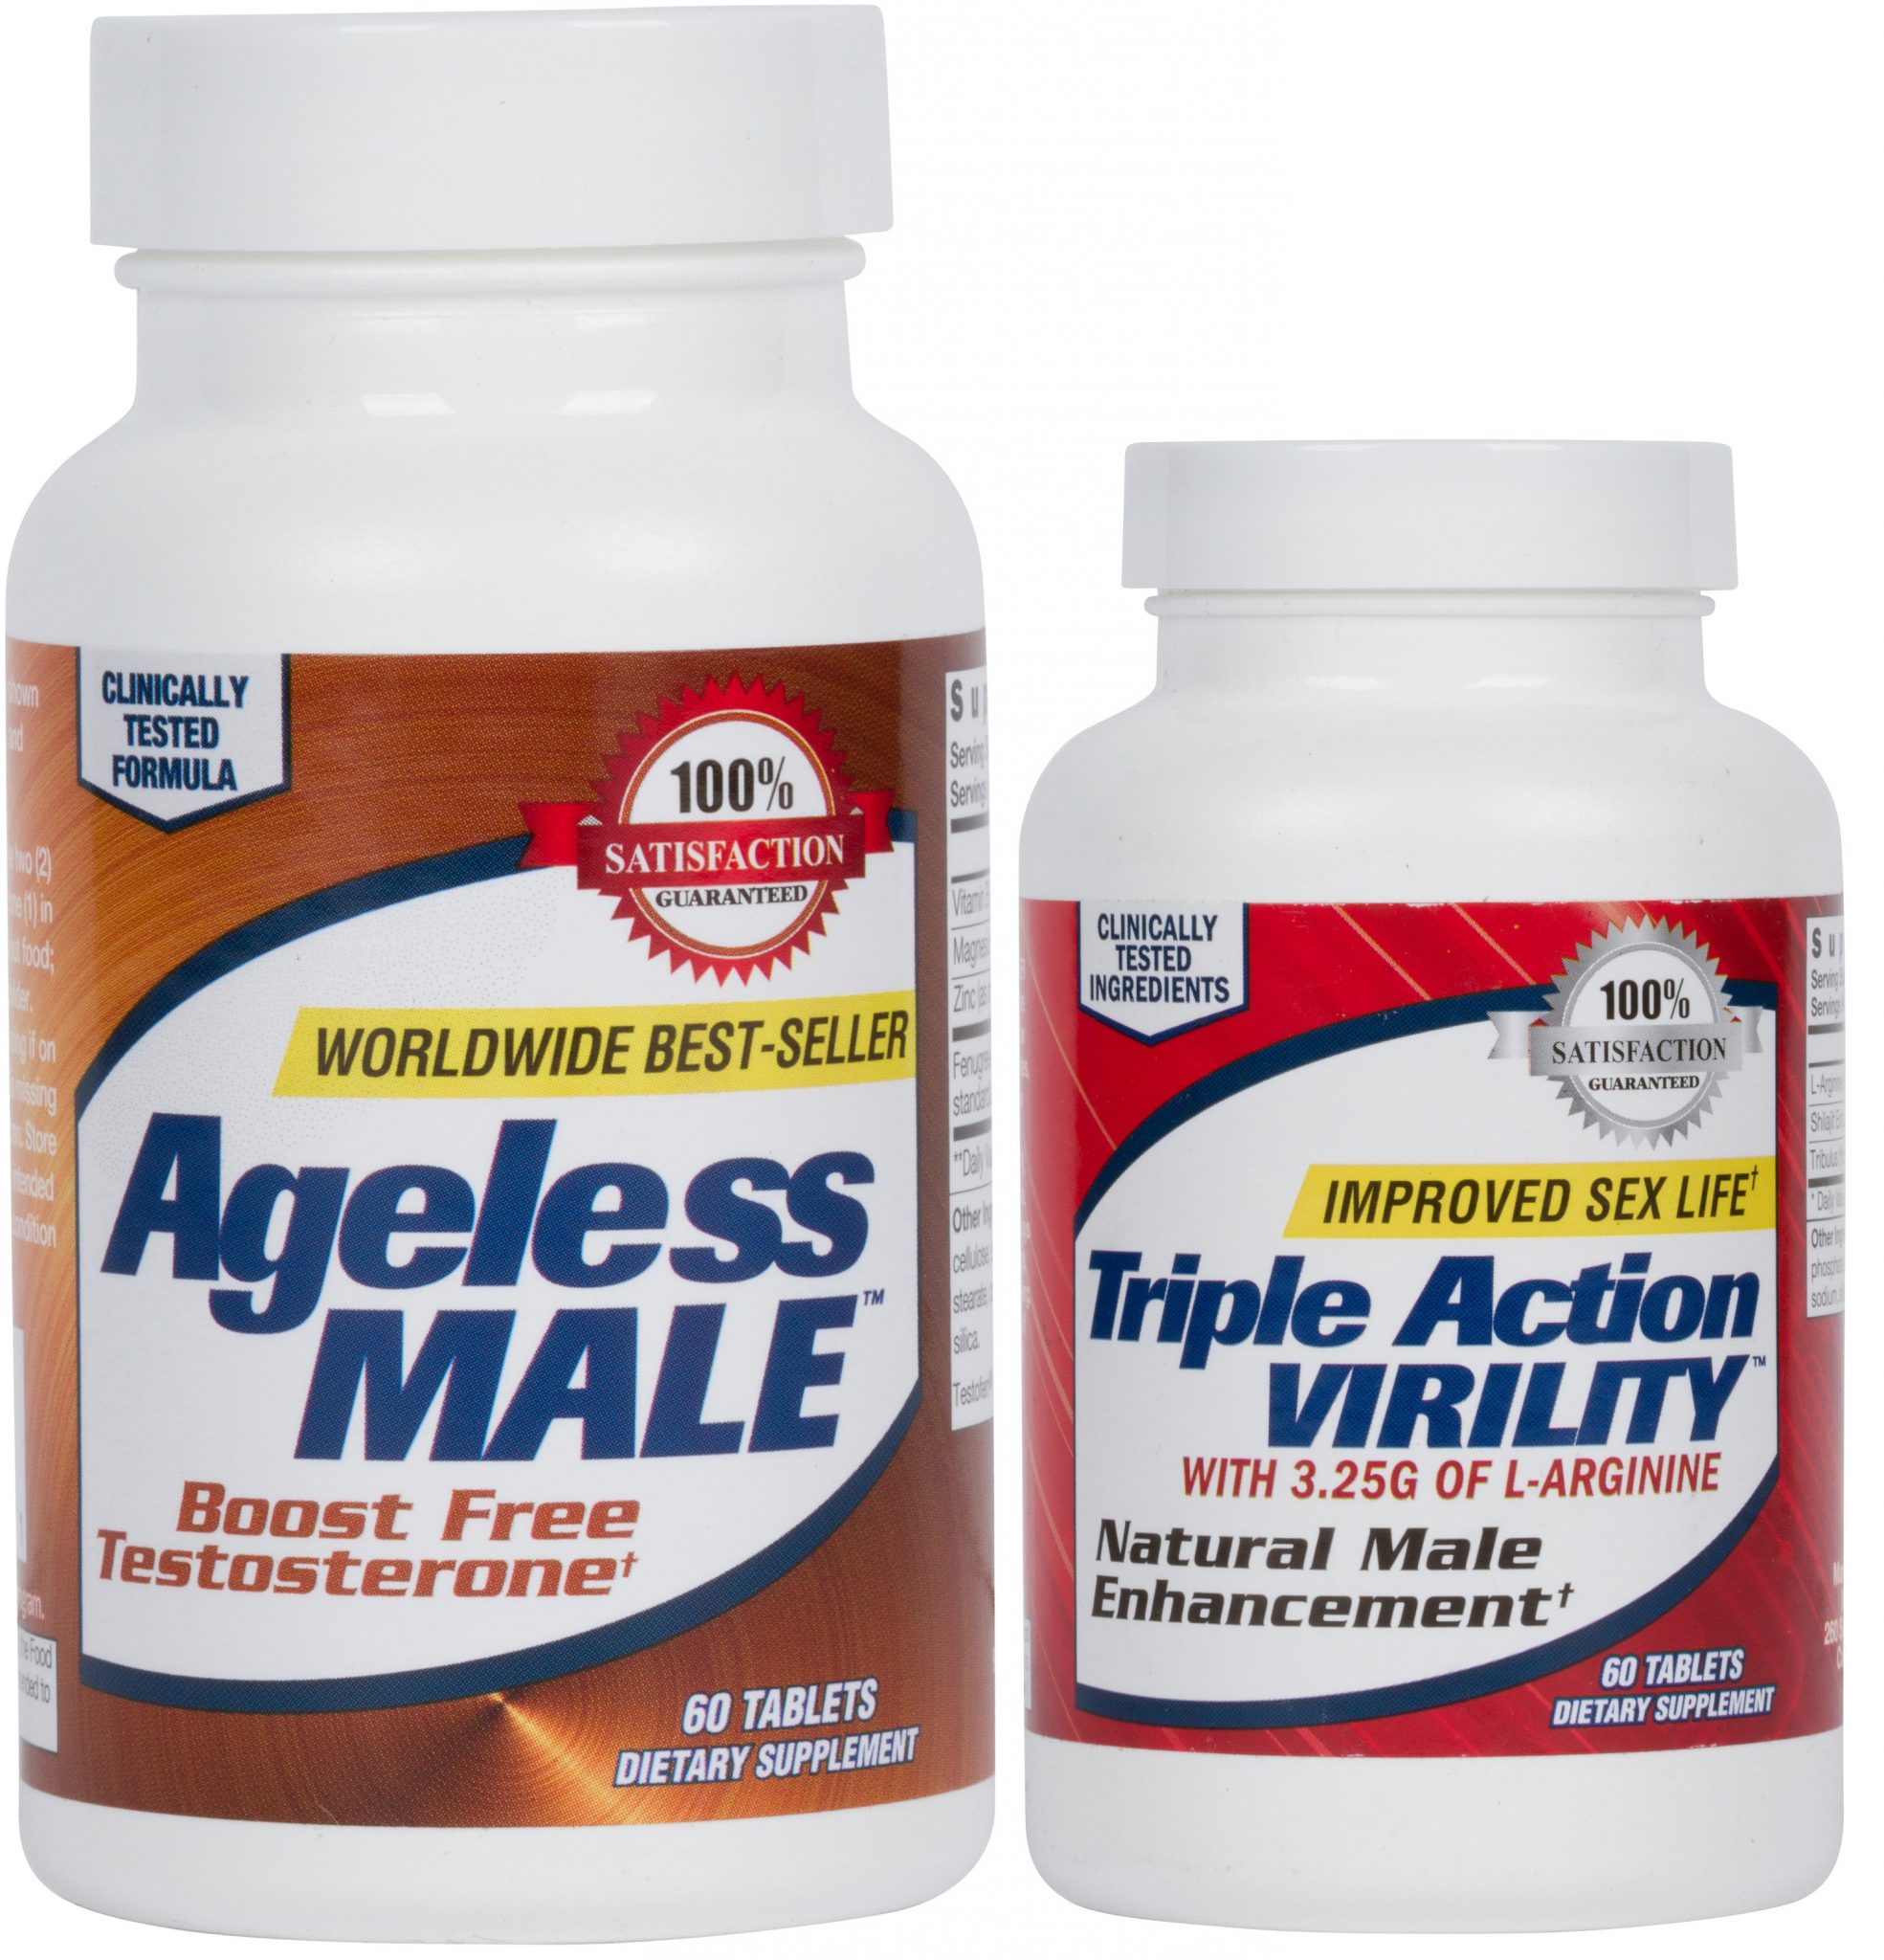 Using Ageless Male you can improve your general health, your physical condi...